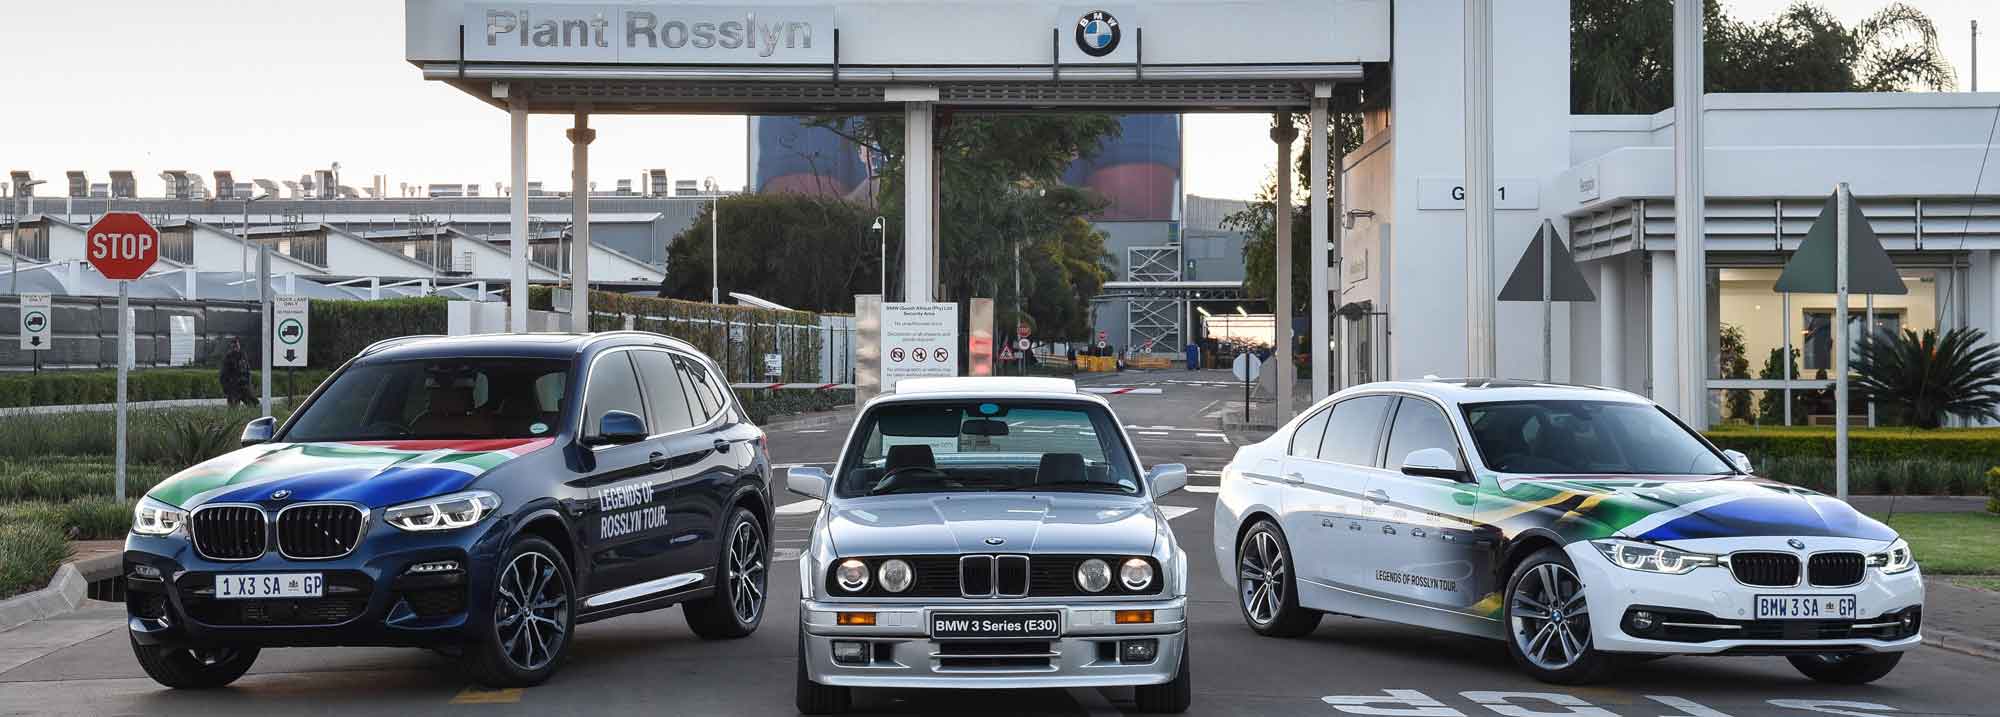 BMW celebrates 50 years in South Africa and announces electrification of Rosslyn plant video-banner